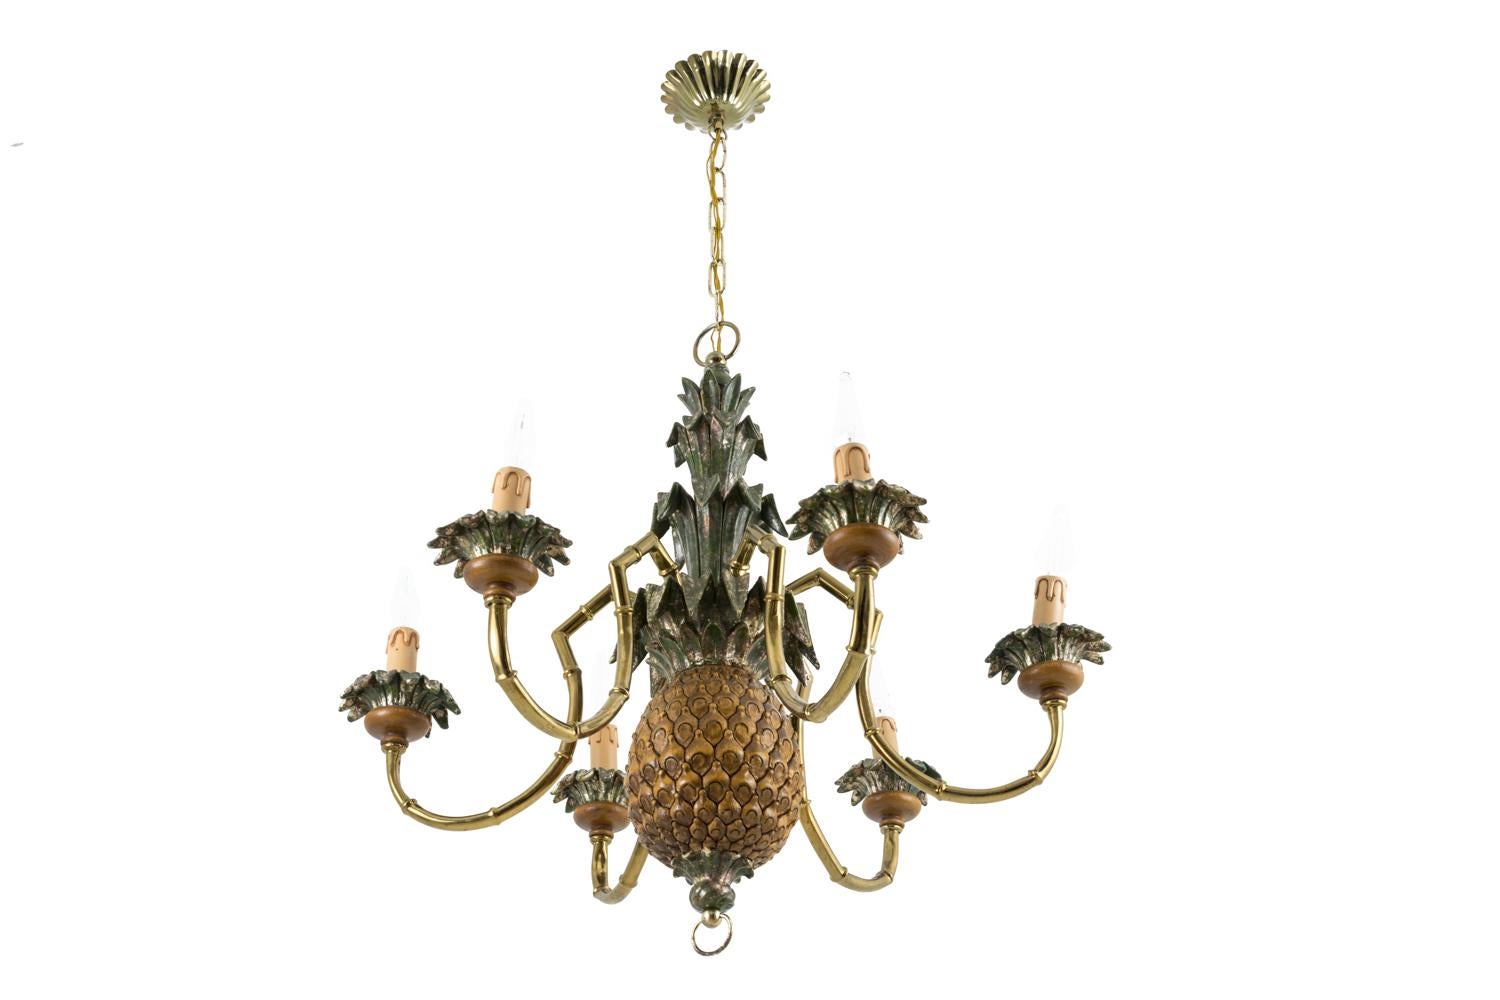 Pineapple chandelier in lacquered wood and gilt brass. Gadroons shape cache-bélière (hide hook). Central shaft decorated with a green and brown lacquered wood pineapple where six bamboo shape gilt brass arm light are hung. Cups with a lacquered